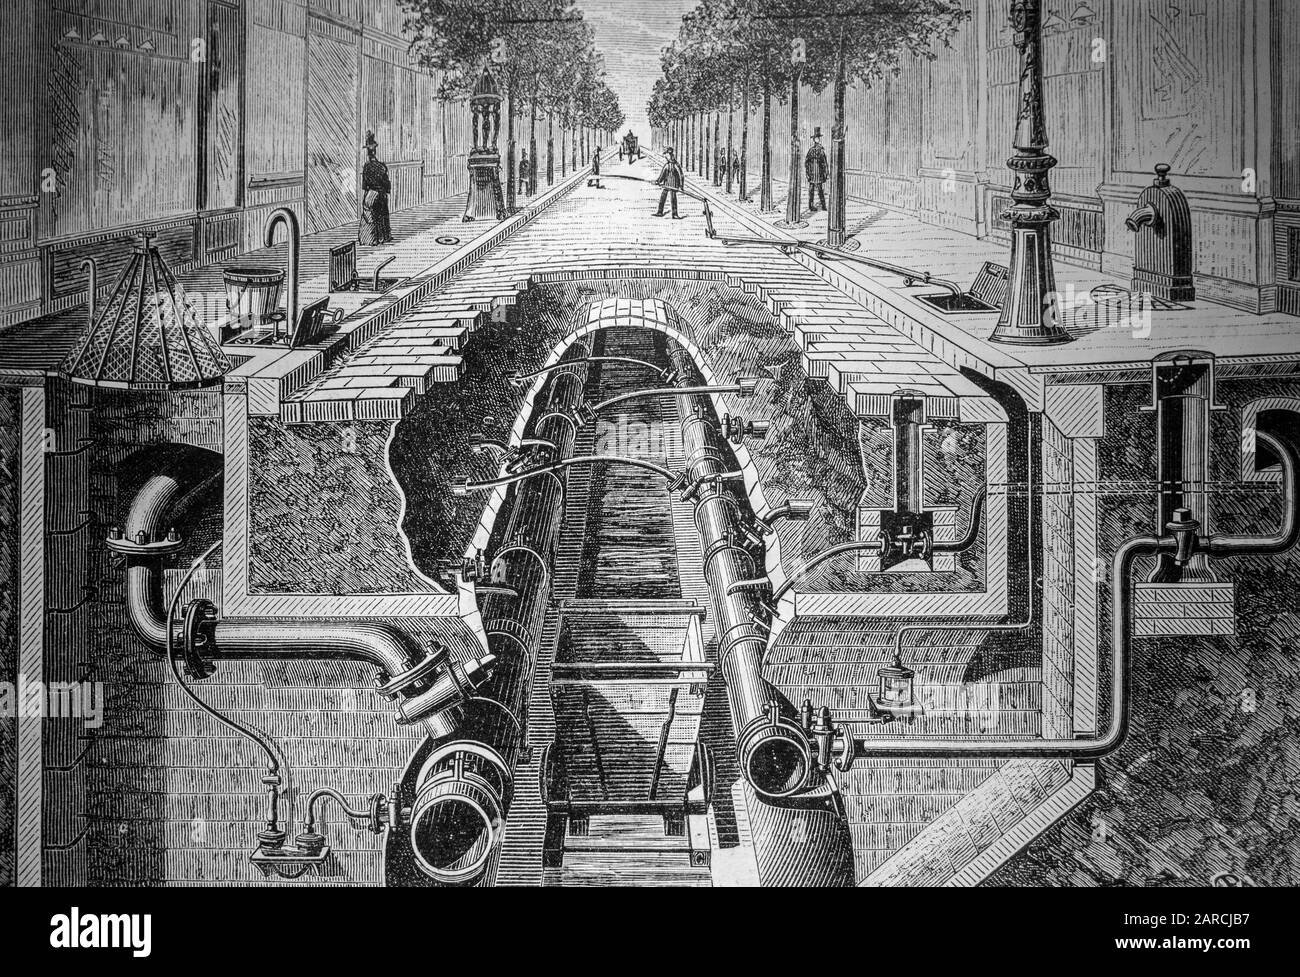 1880 drawing of large scale system for water supply management and sanitation under the streets in the city Paris, France Stock Photo